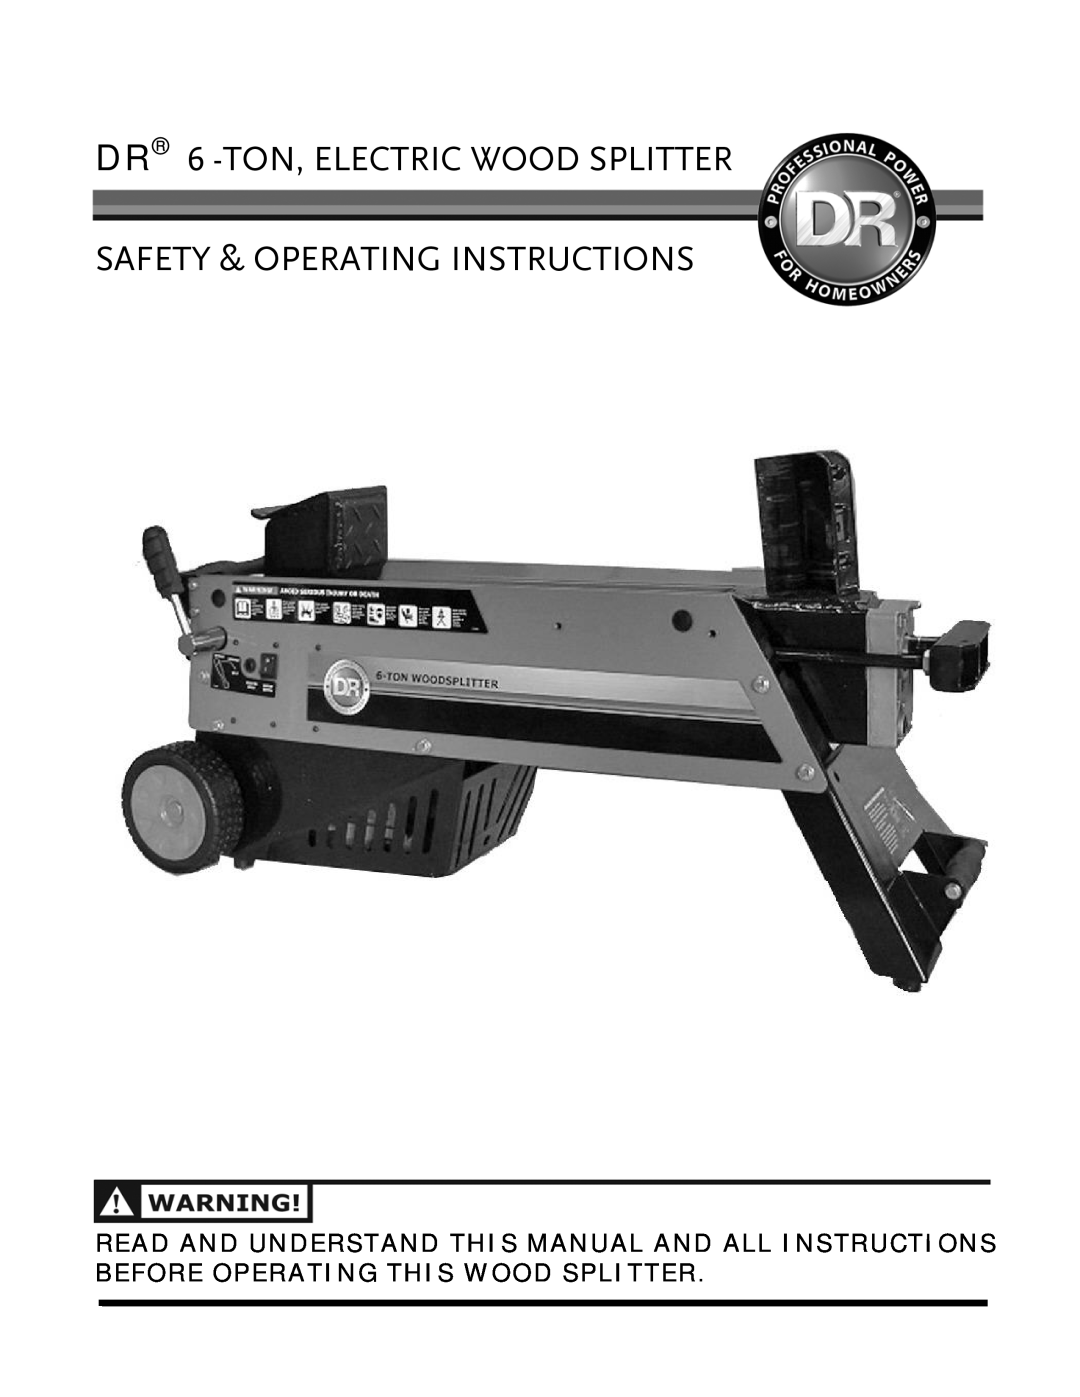 Country Home Products 6-TON operating instructions DR 6 -TON,ELECTRIC WOOD SPLITTER, Safety & Operating Instructions 